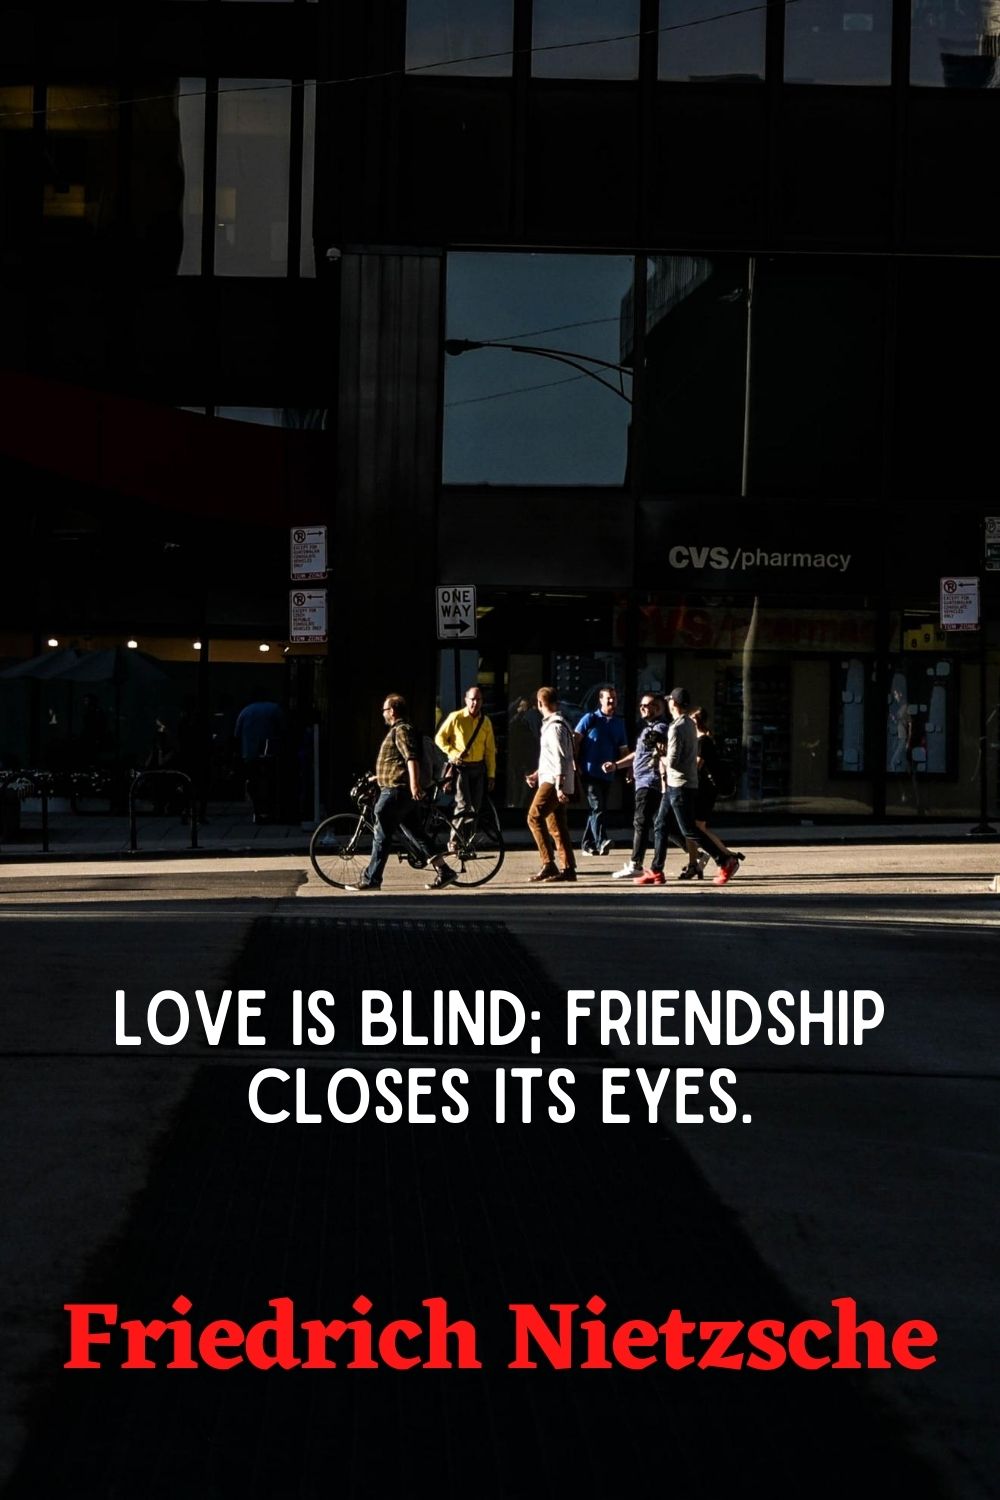 Love is blind friendship closes its eyes.